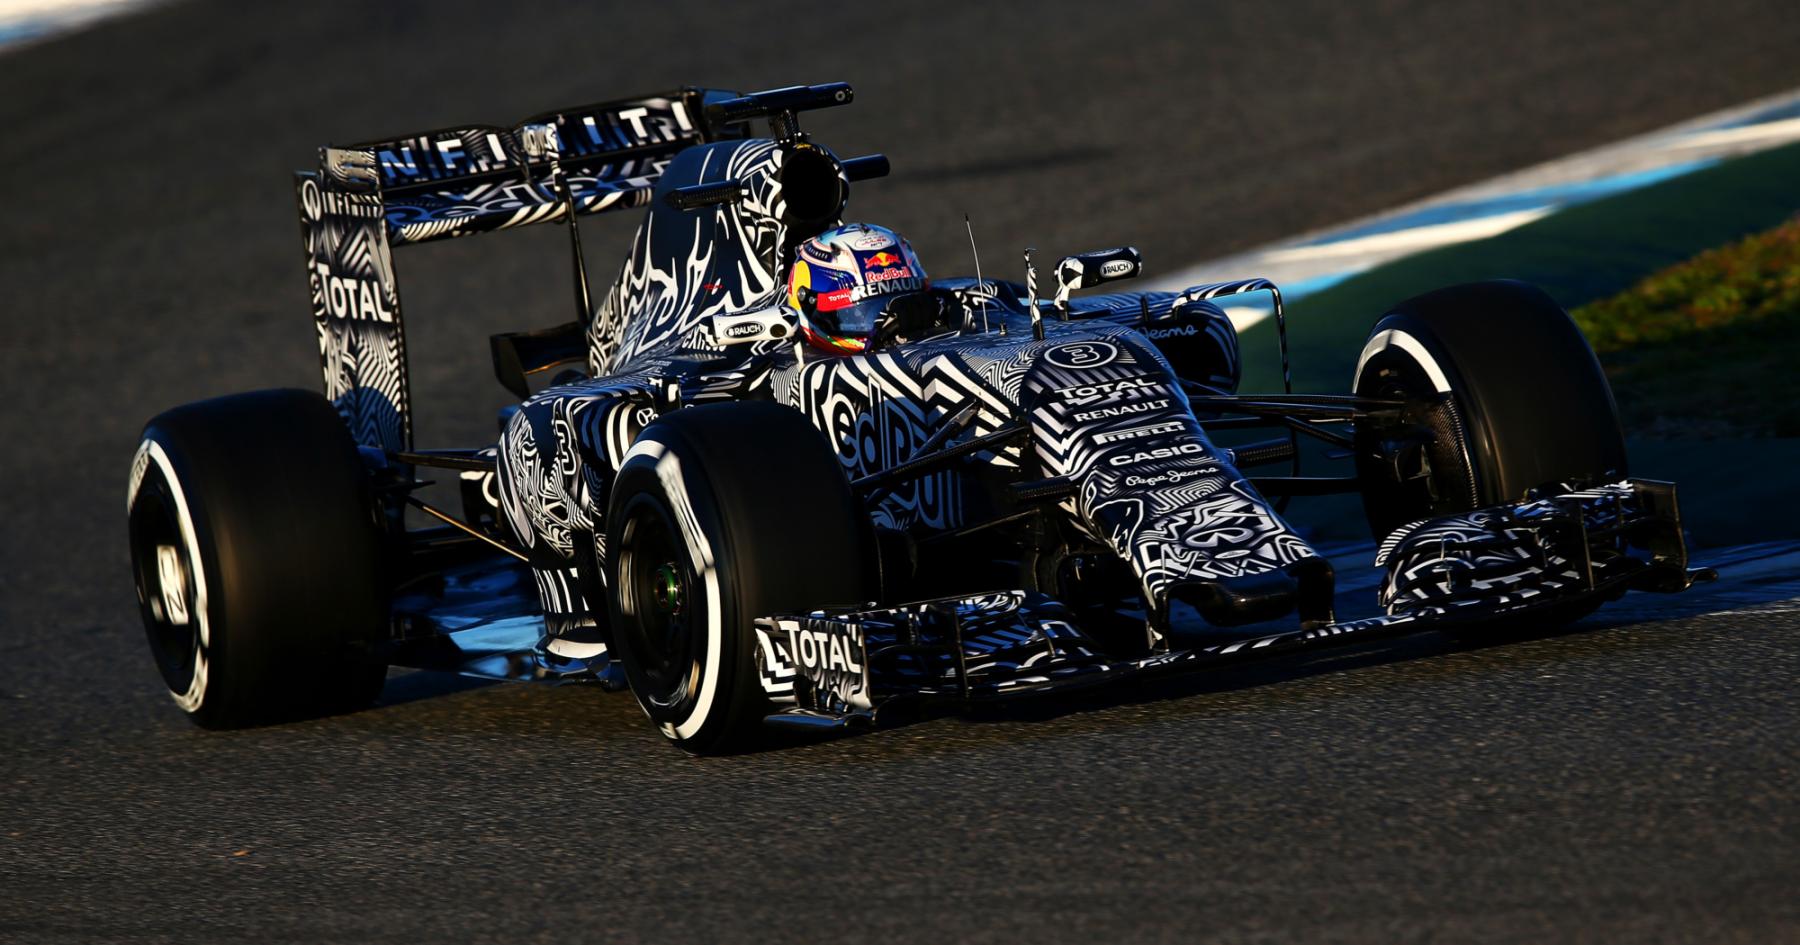 Red Bull is no stranger to a special F1 livery